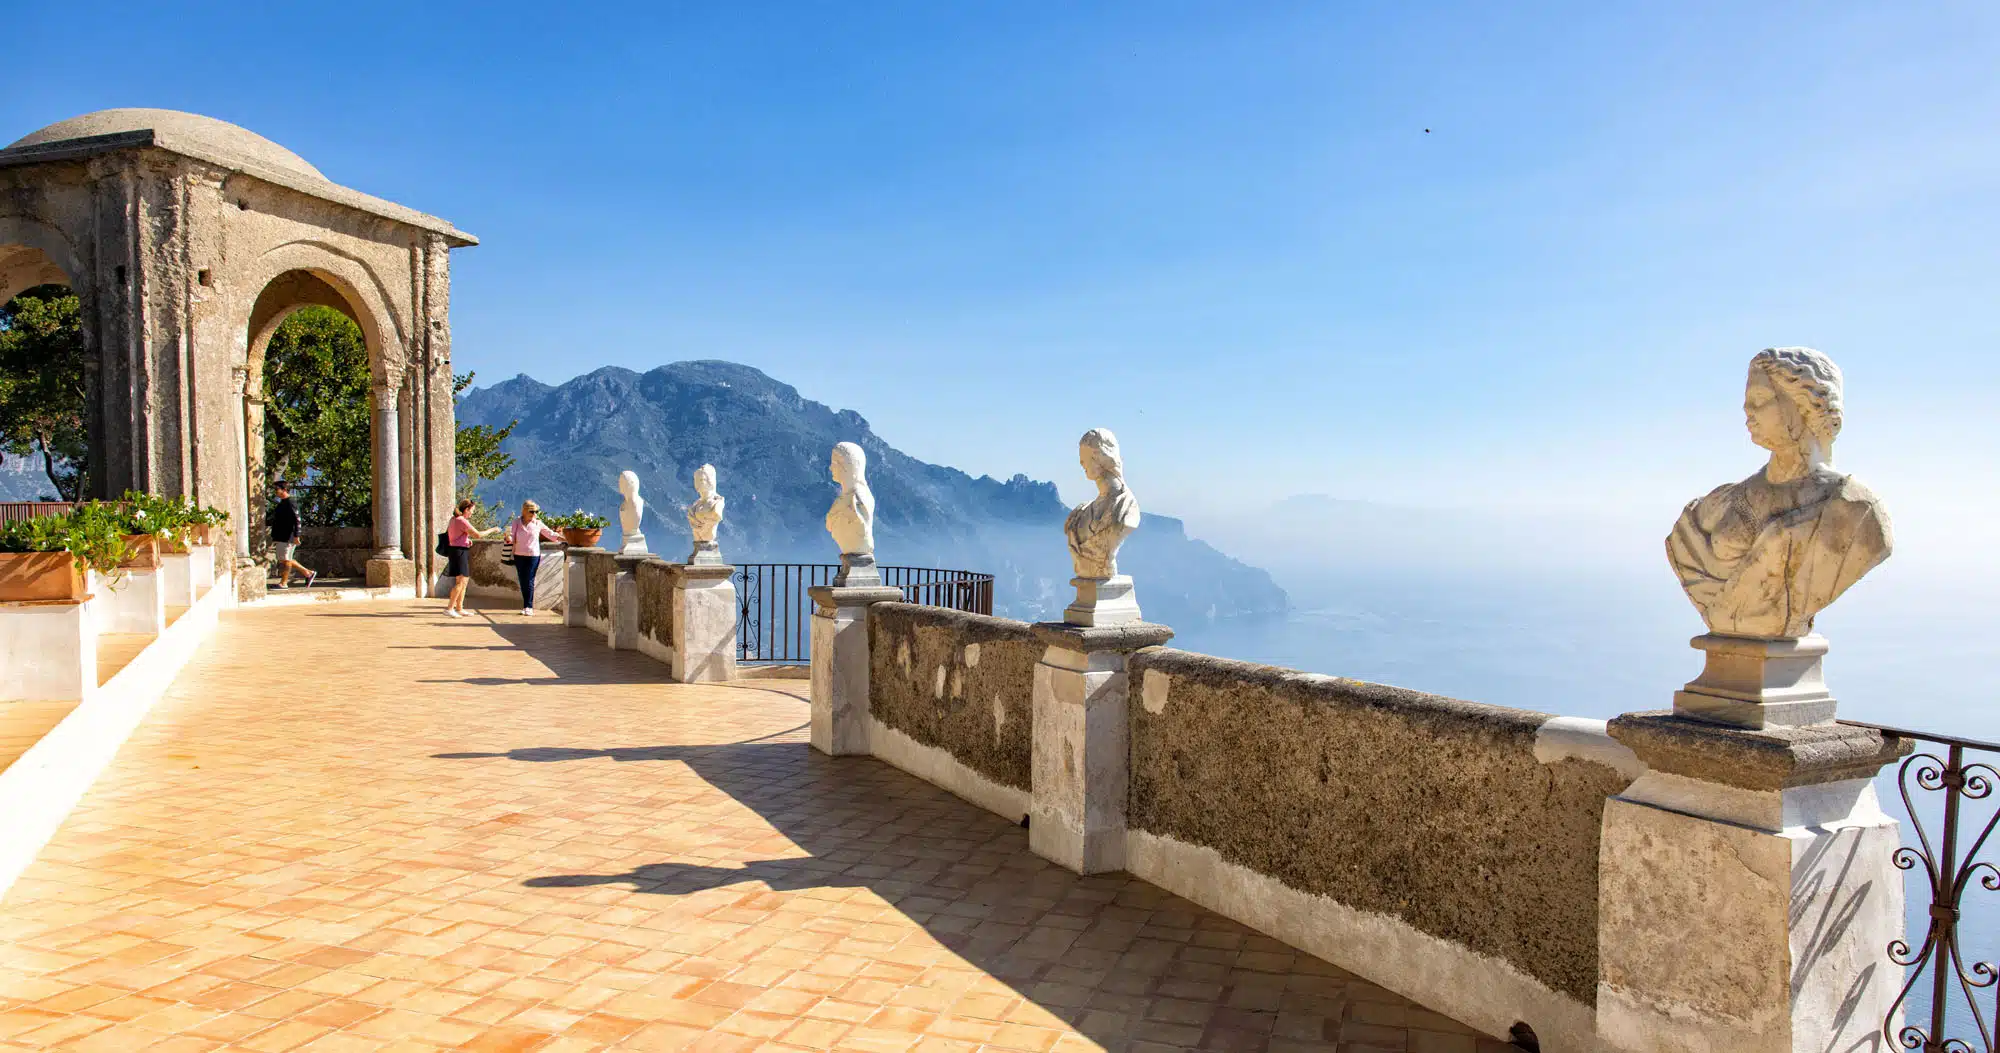 Featured image for “15 Best Things to Do on the Amalfi Coast of Italy”